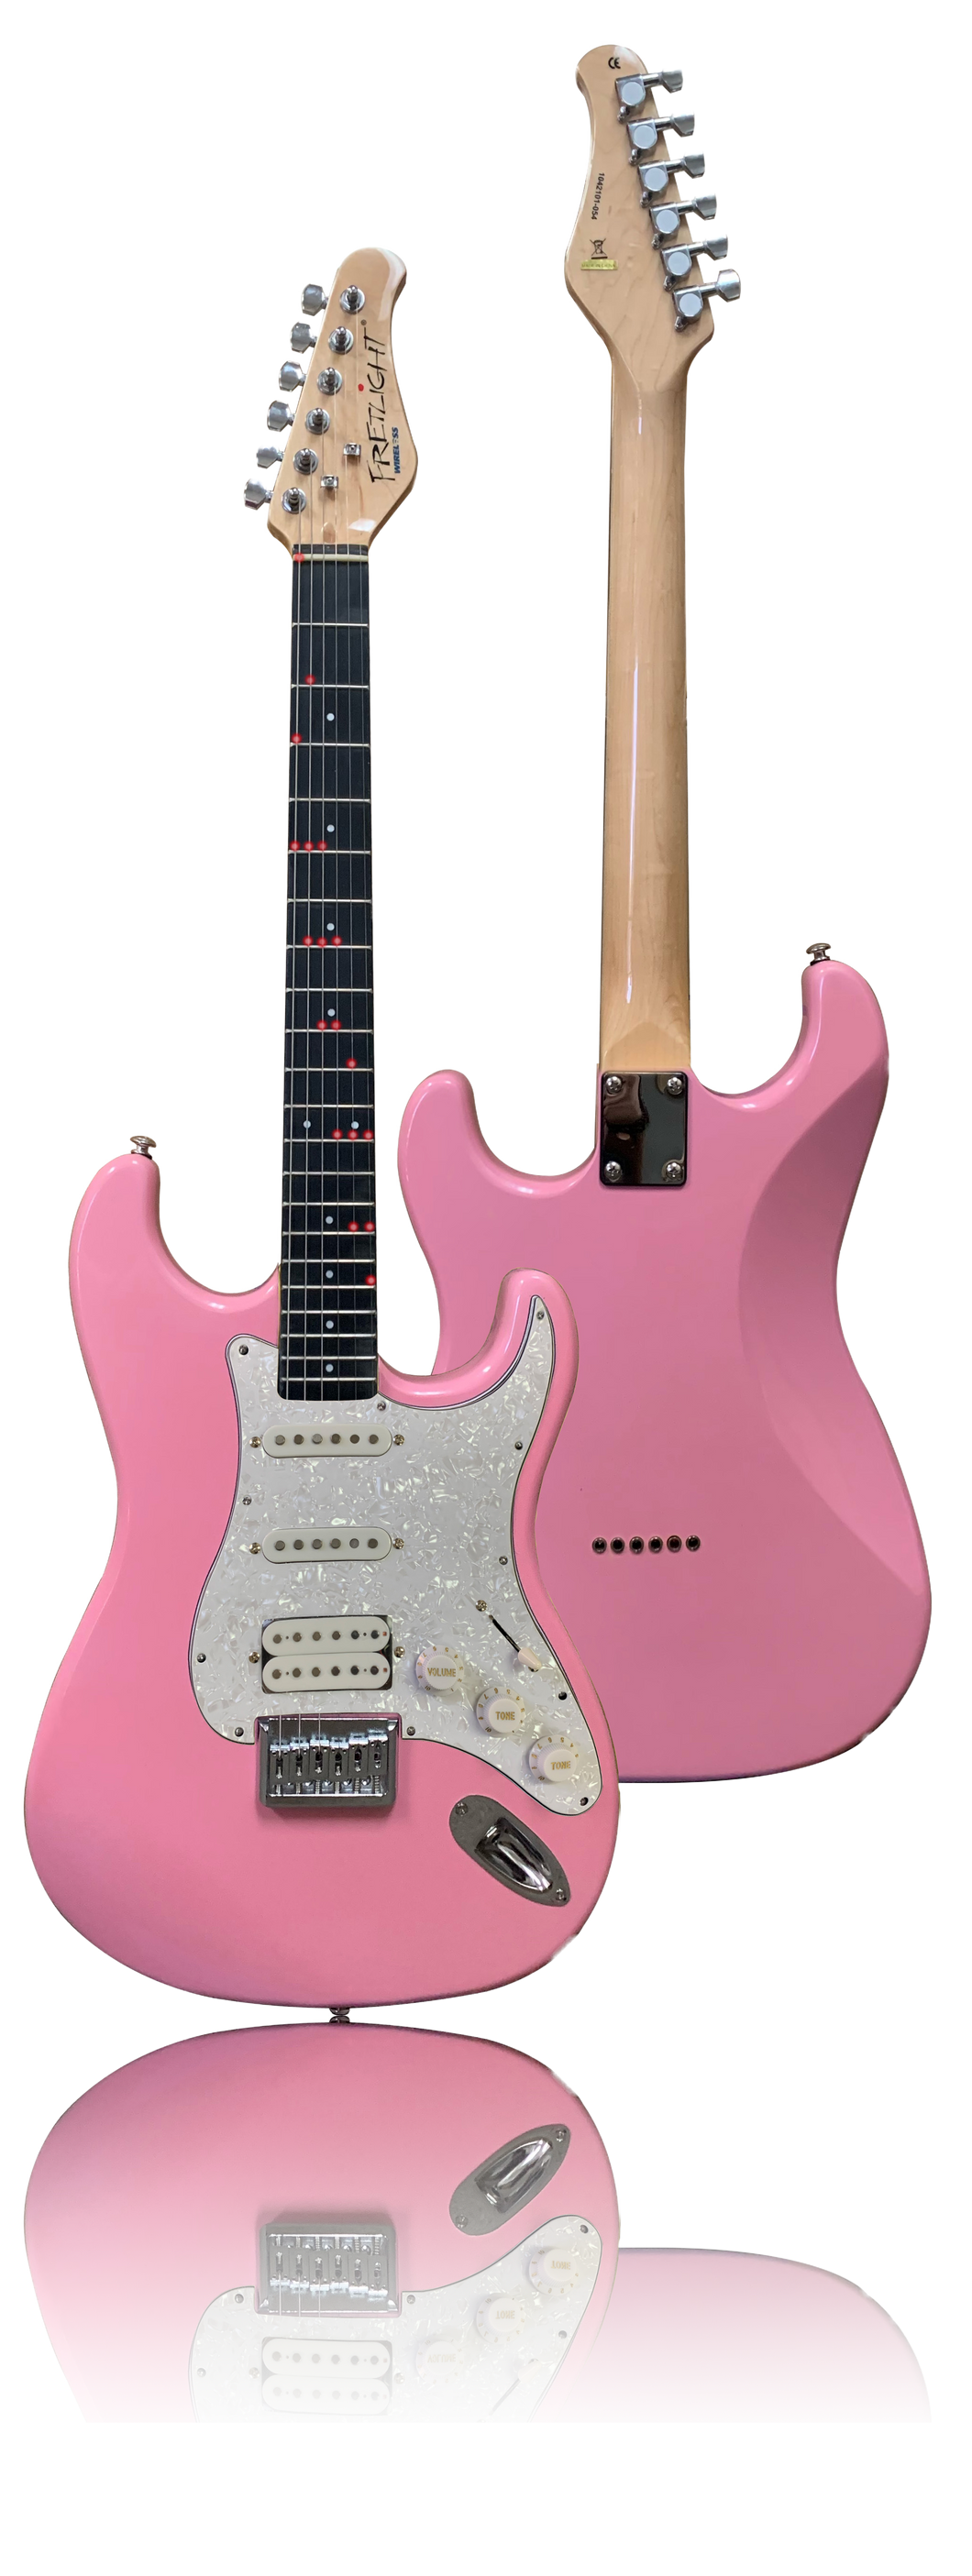 FG-621 Custom Shell Pink with White Pickguard